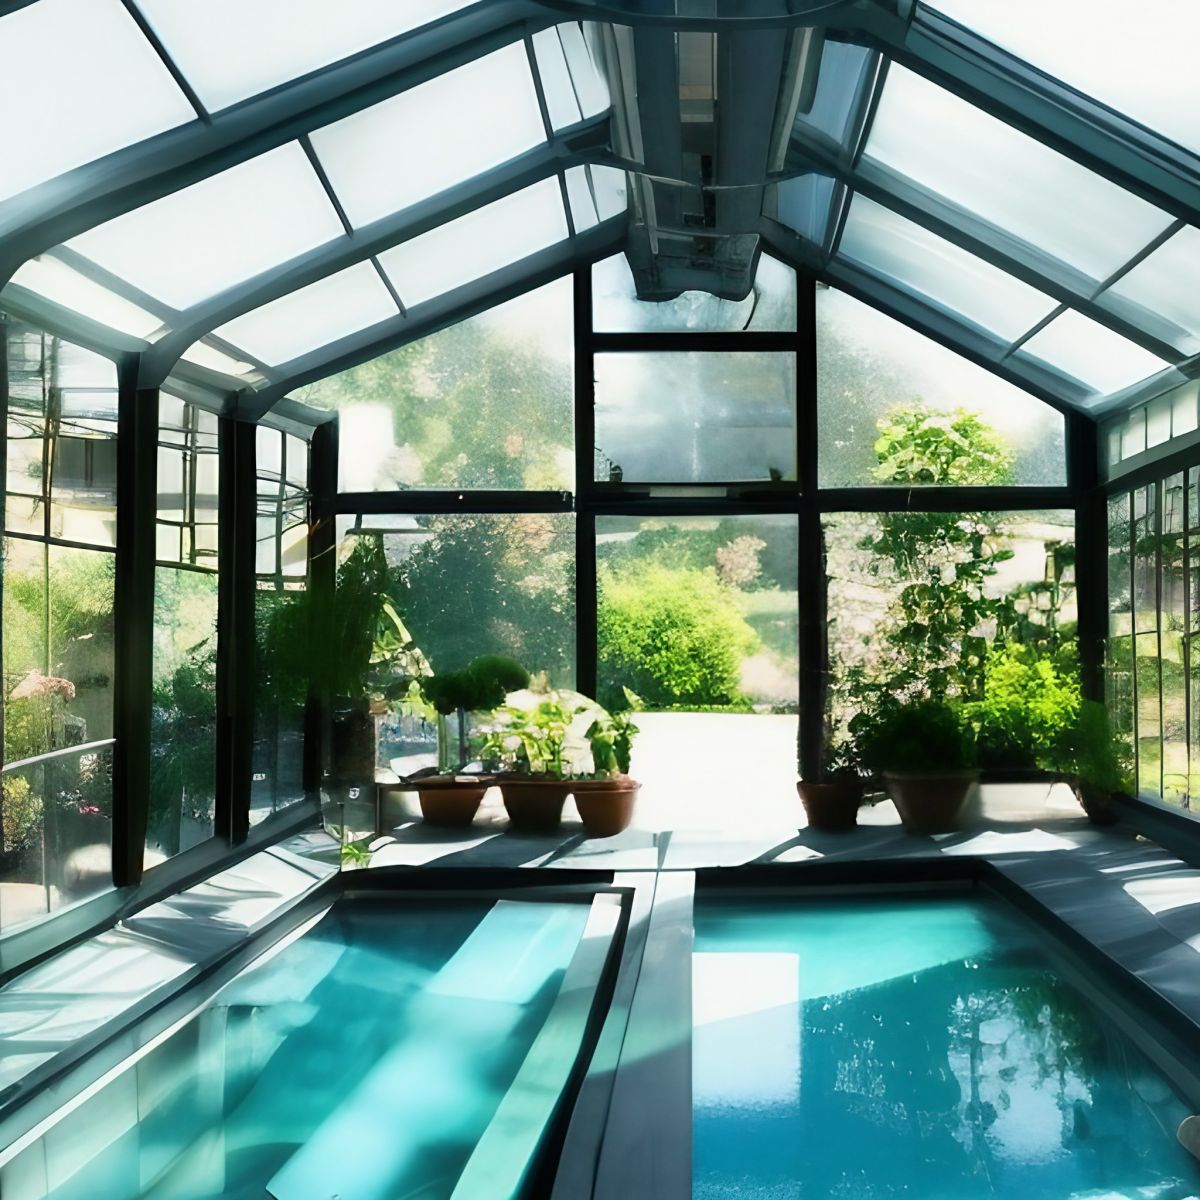 Pool house in the style of a greenhouse with light shining through the ceiling 